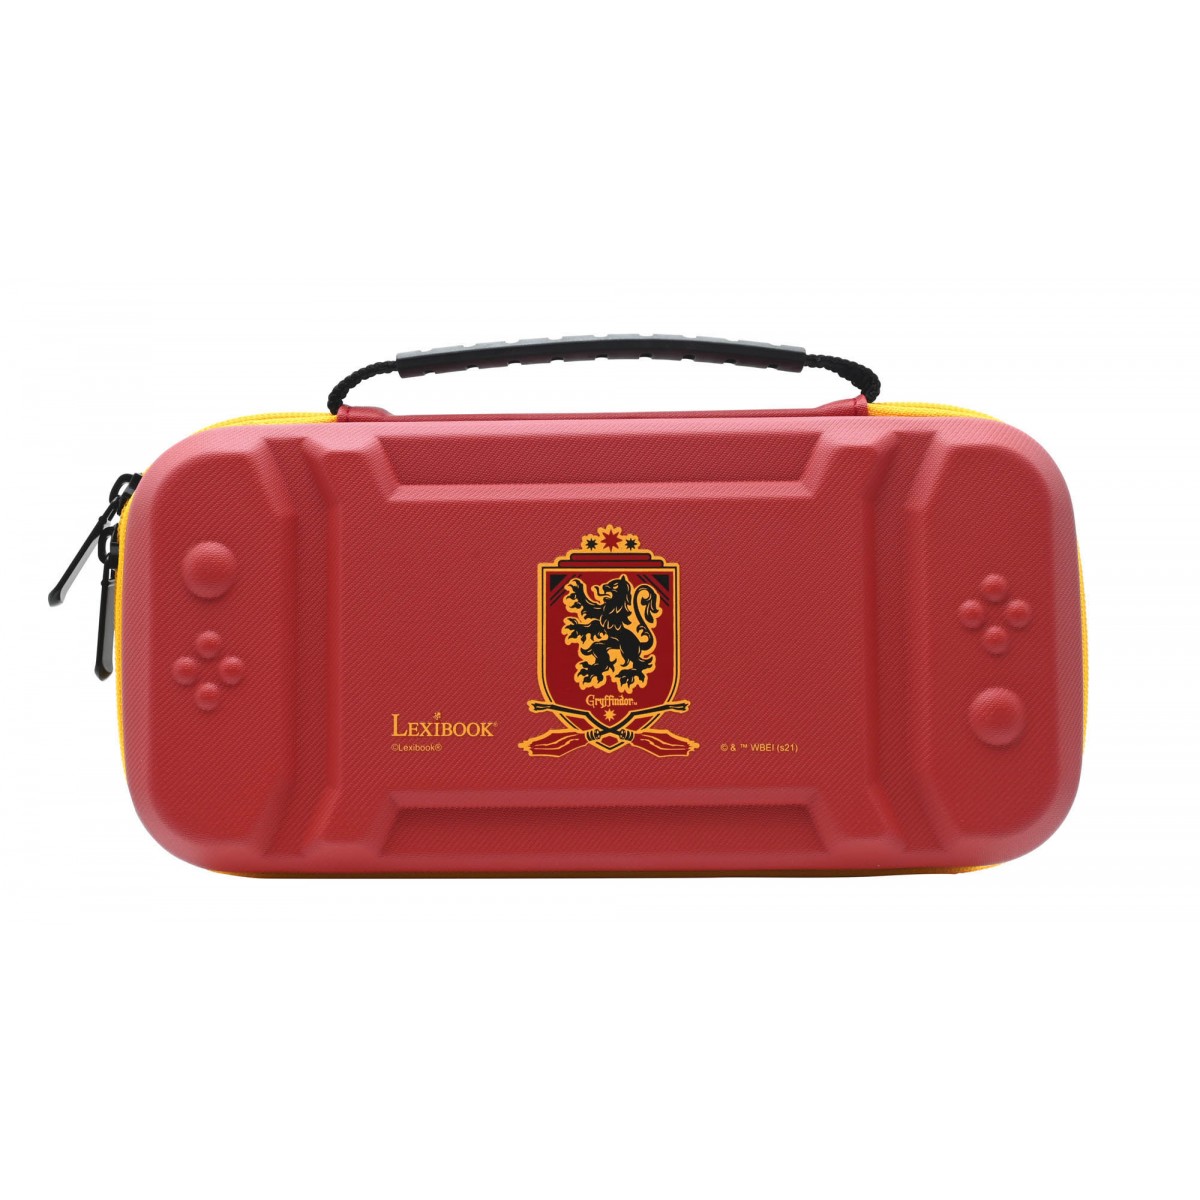 Harry Potter protective case for console and accessories